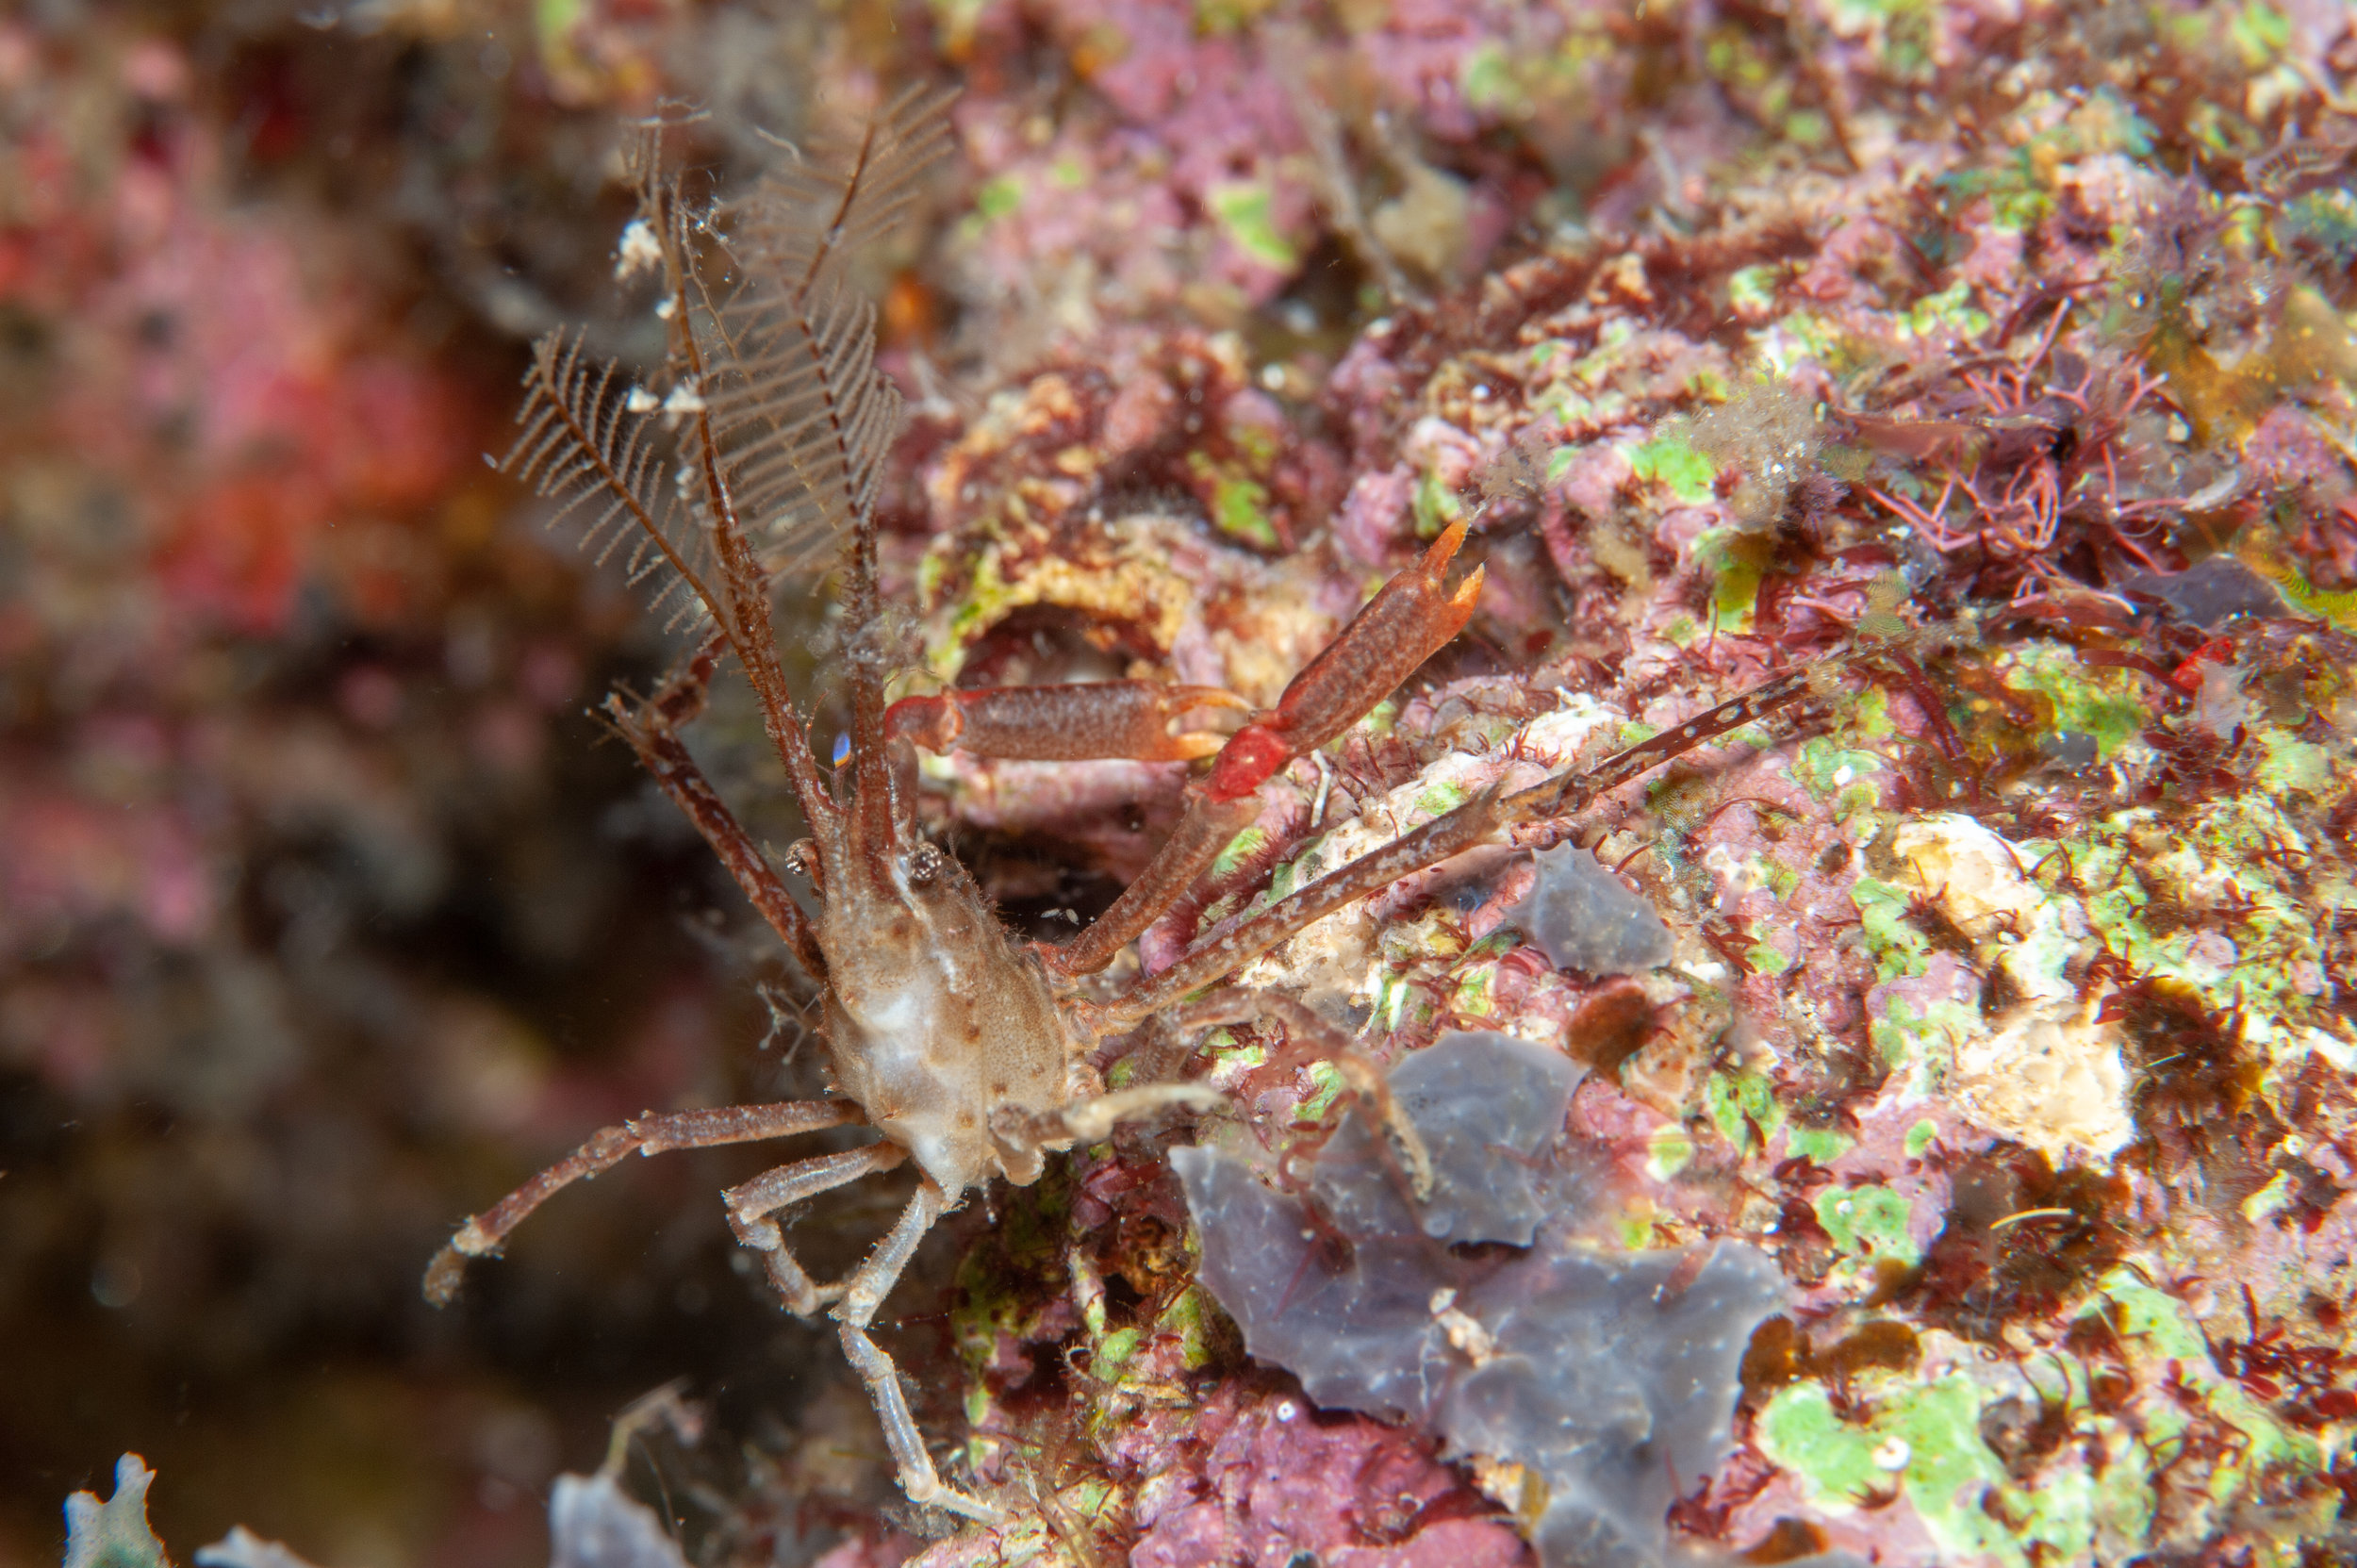 Bull hydroid crab - Naxioides taurus, Meil's Reef, Father's Reefs, New Britain